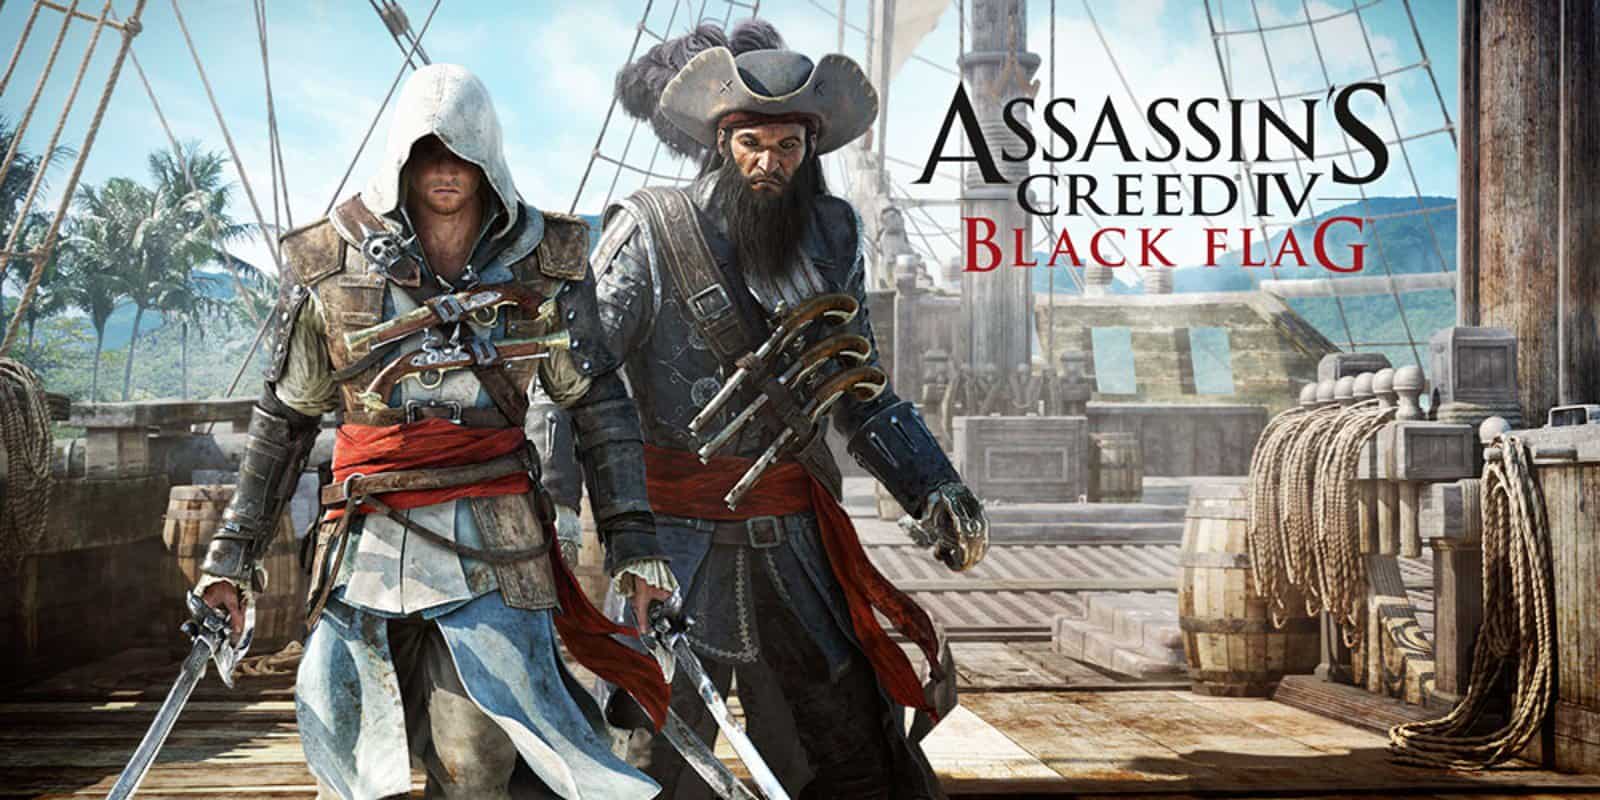 Assassin's Creed IV Black Flag Game Full Version PC Game Download